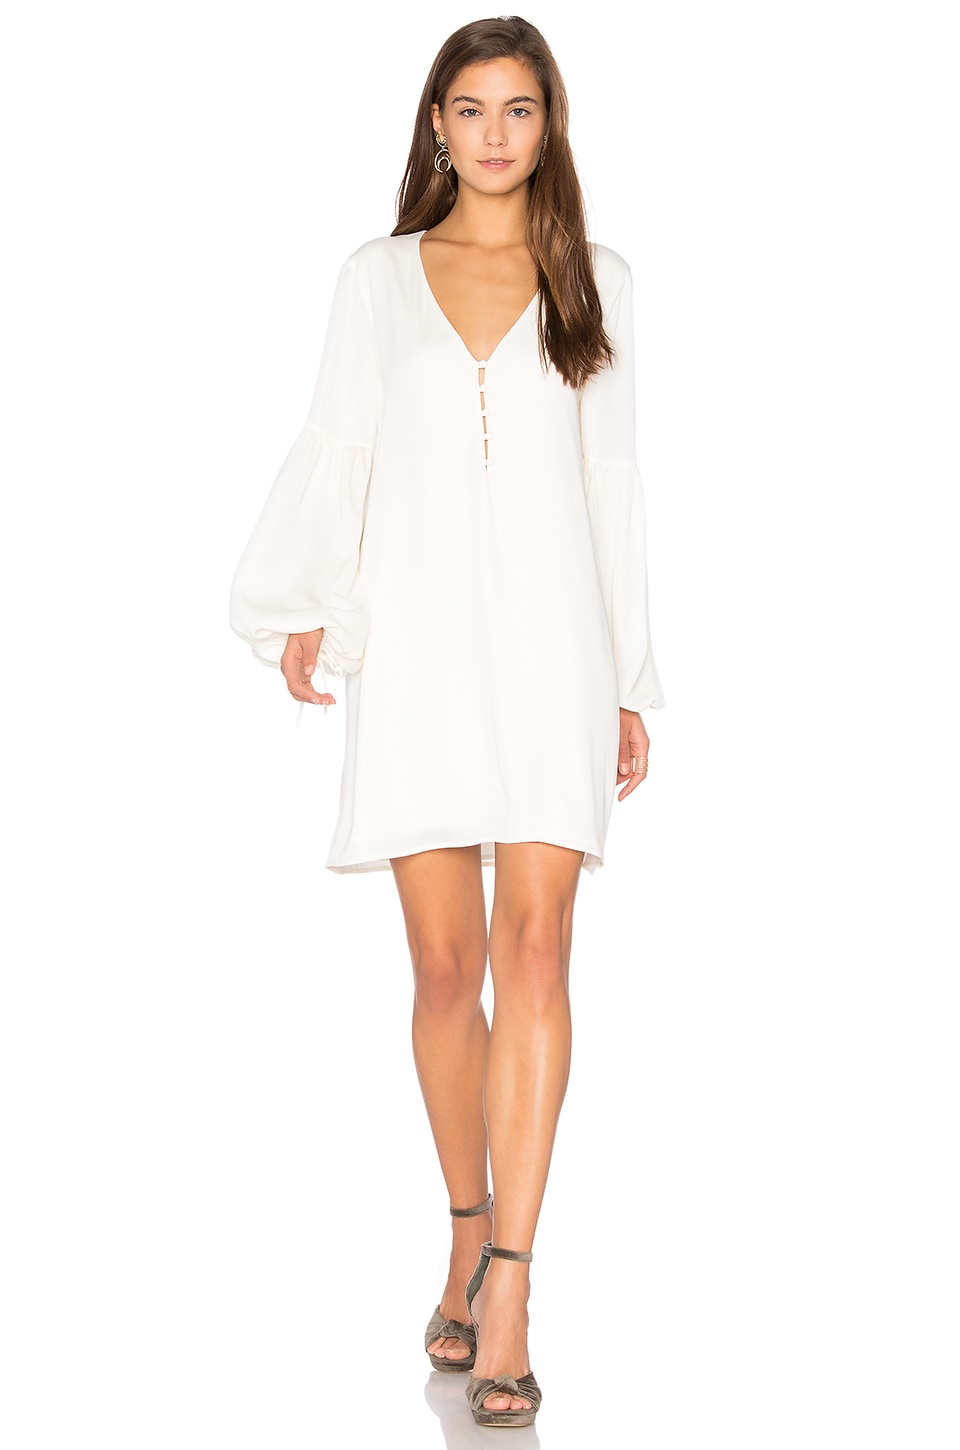 L'Academie The Airy Dress in Ivory | REVOLVE